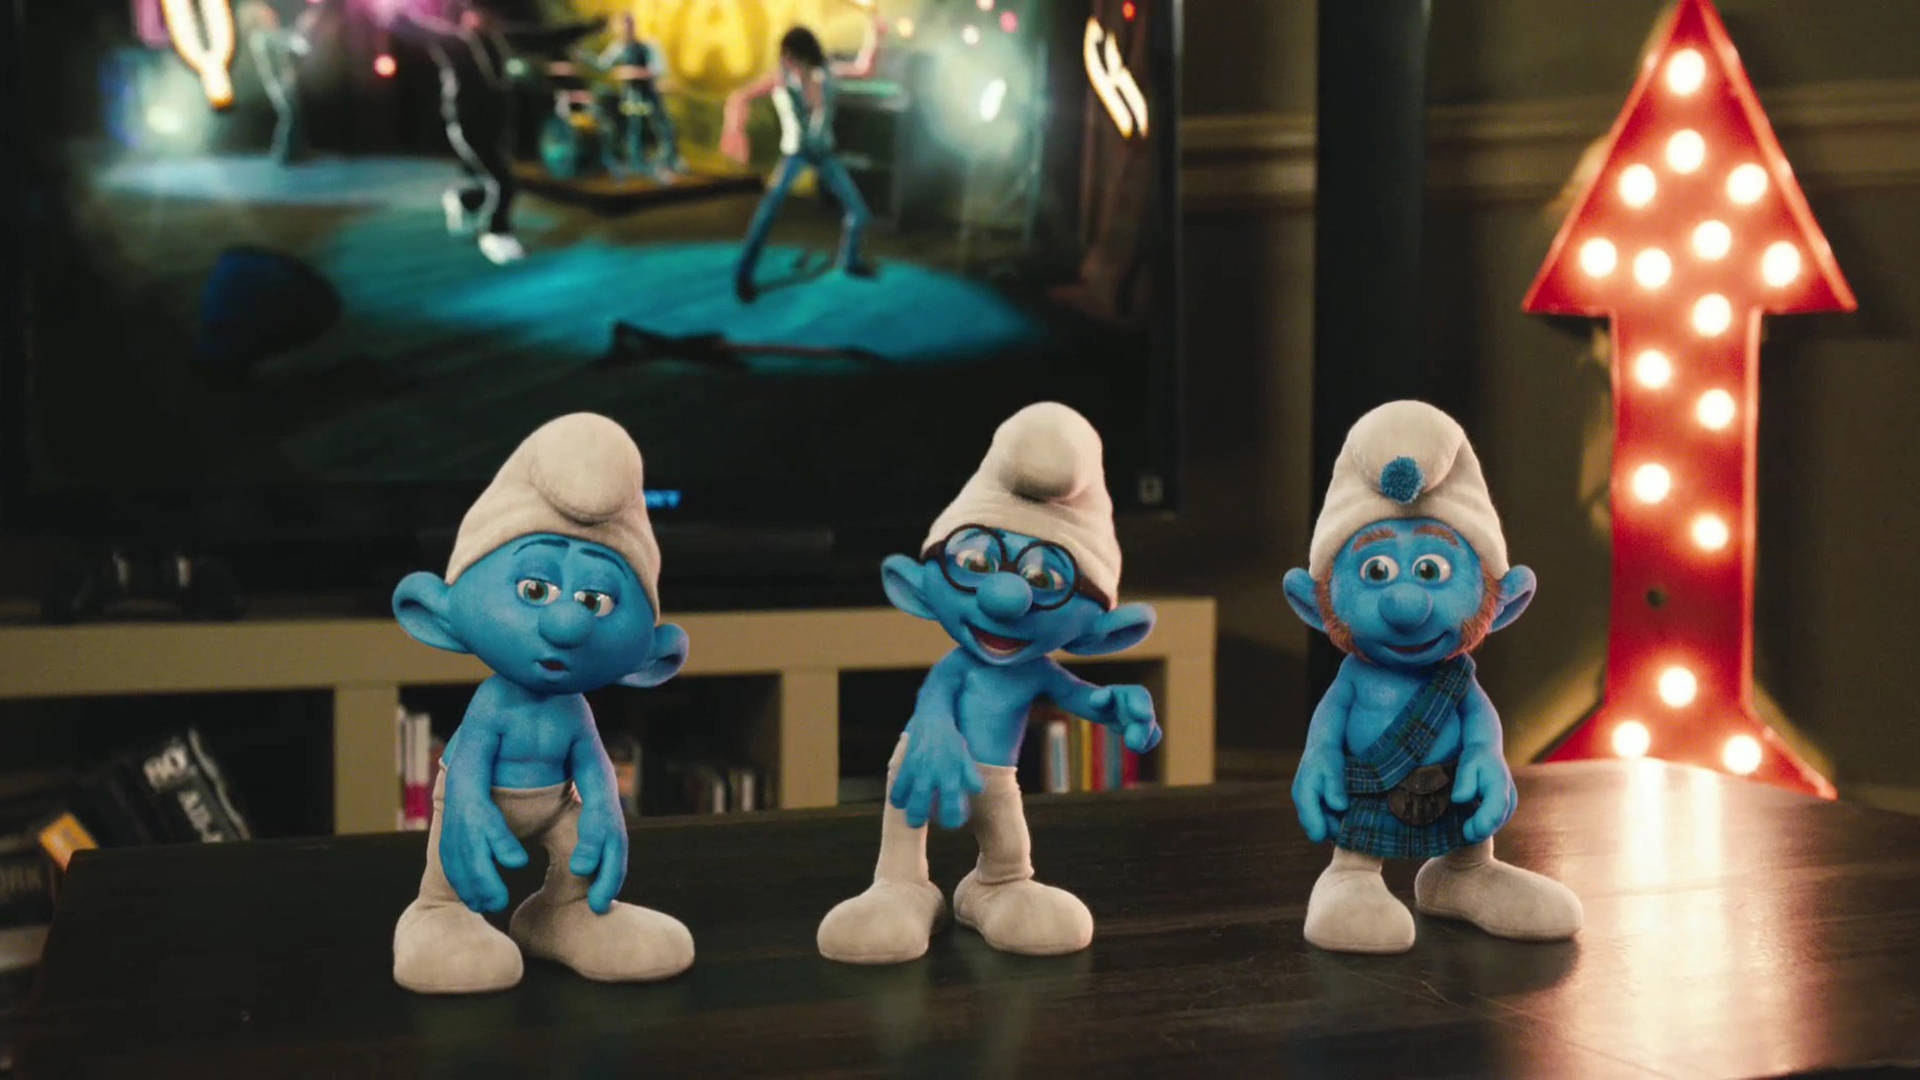 1920x1080 Download The Smurfs Live Action Wallpaper